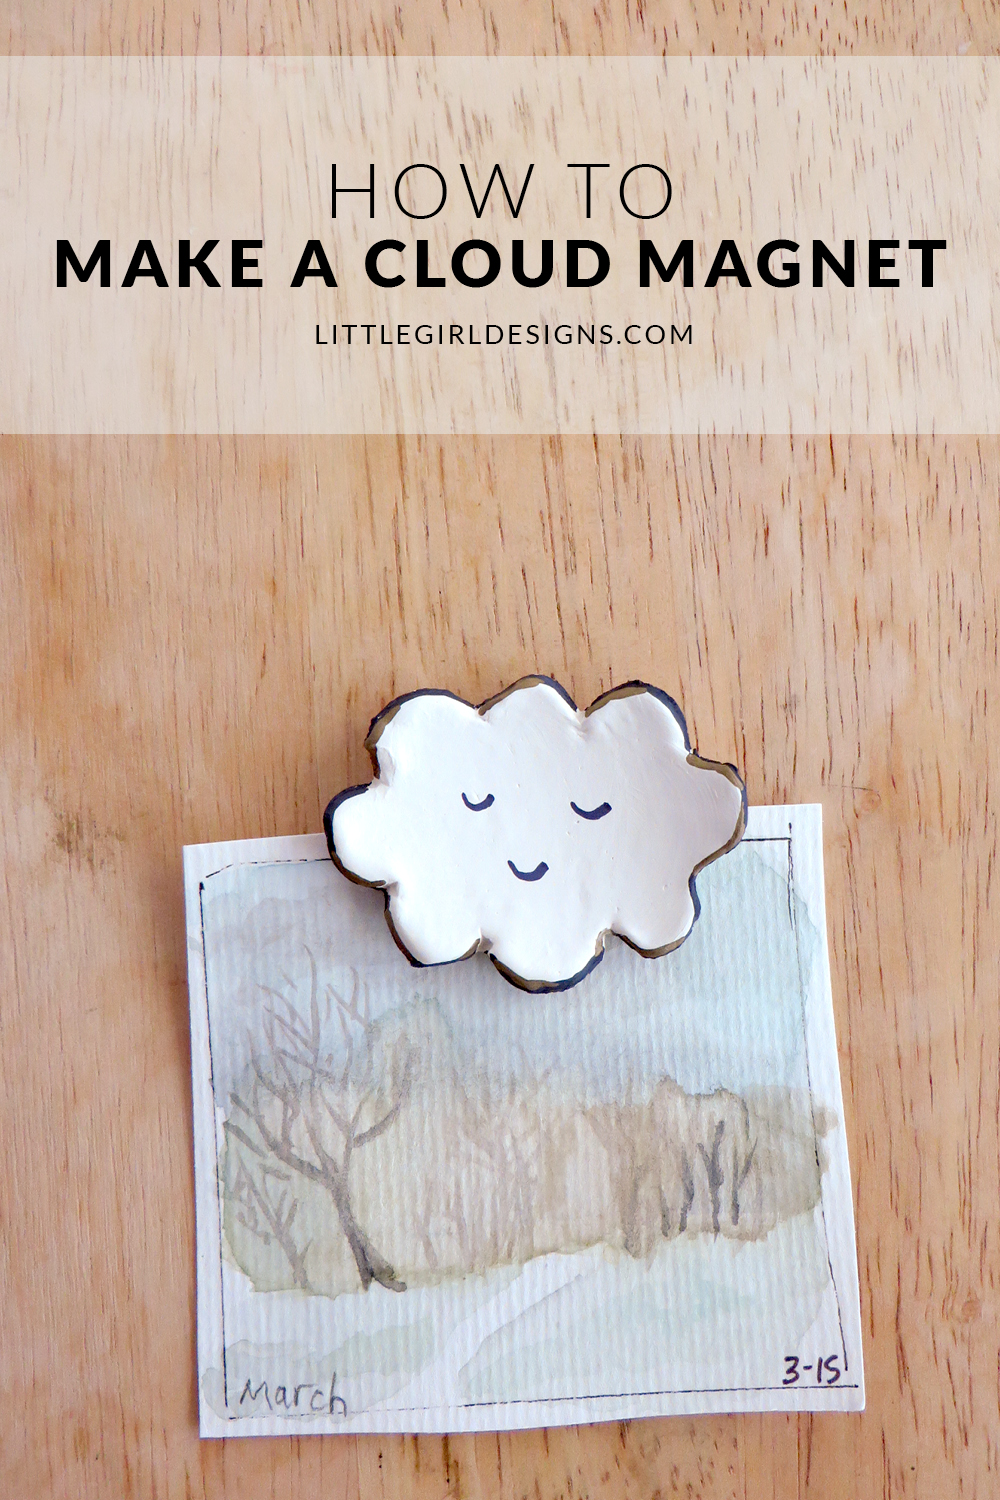 How to Make a Cloud Magnet - Even if you're new to working with air-dry clay, you can easily make a cloud magnet (or a whole set of sweet magnets!) p.s. these make great gifts! via littlegirldesigns.com